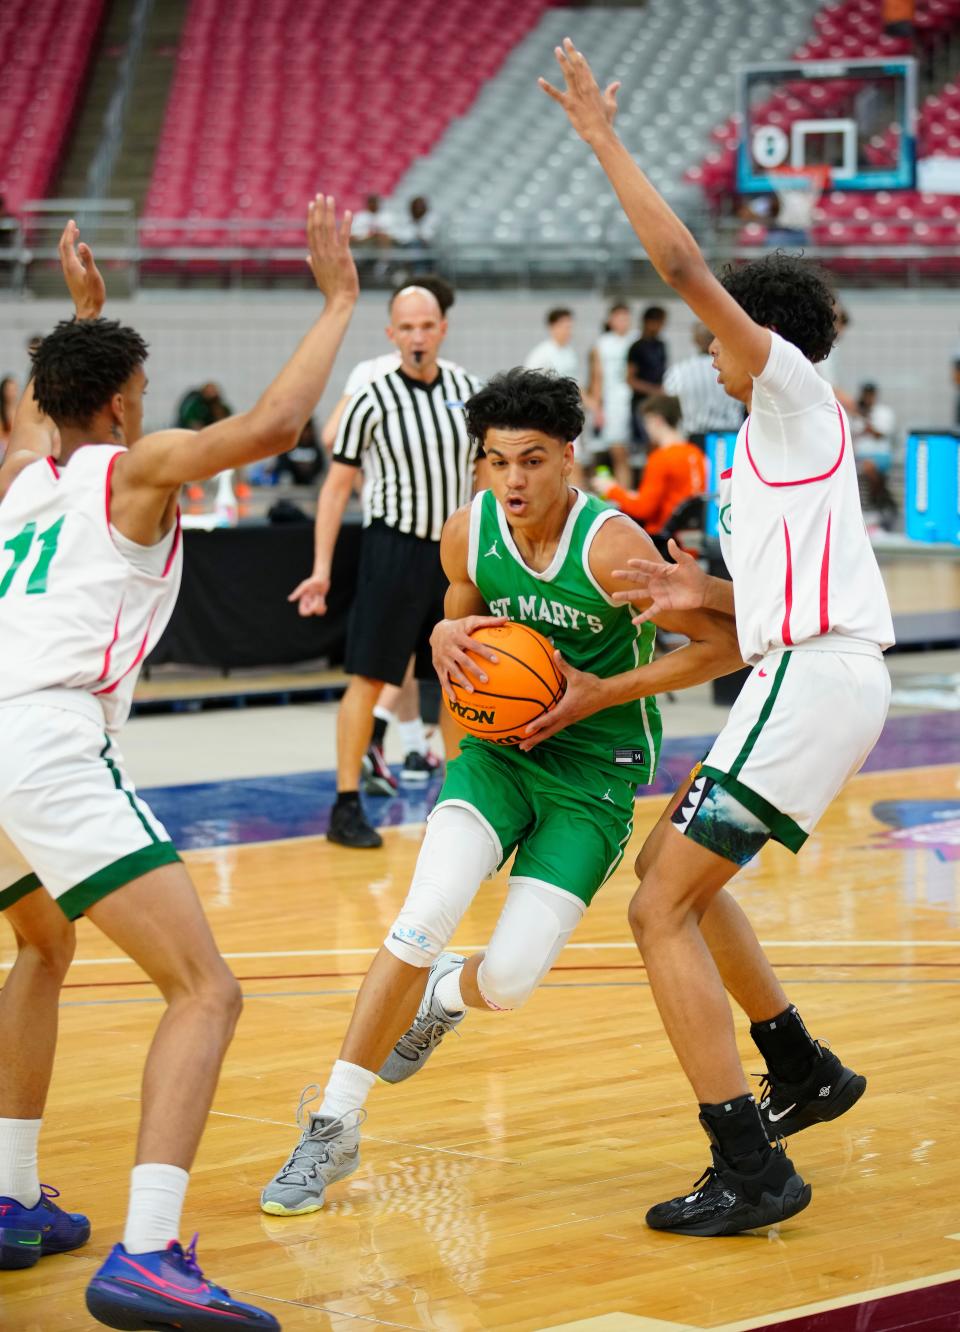 St. Mary’s guard Styles Phipps (1) drives the lane against Smoky Hill during the Section 7 Basketball Tournament at State Farm Stadium in Glendale on June 23, 2023.